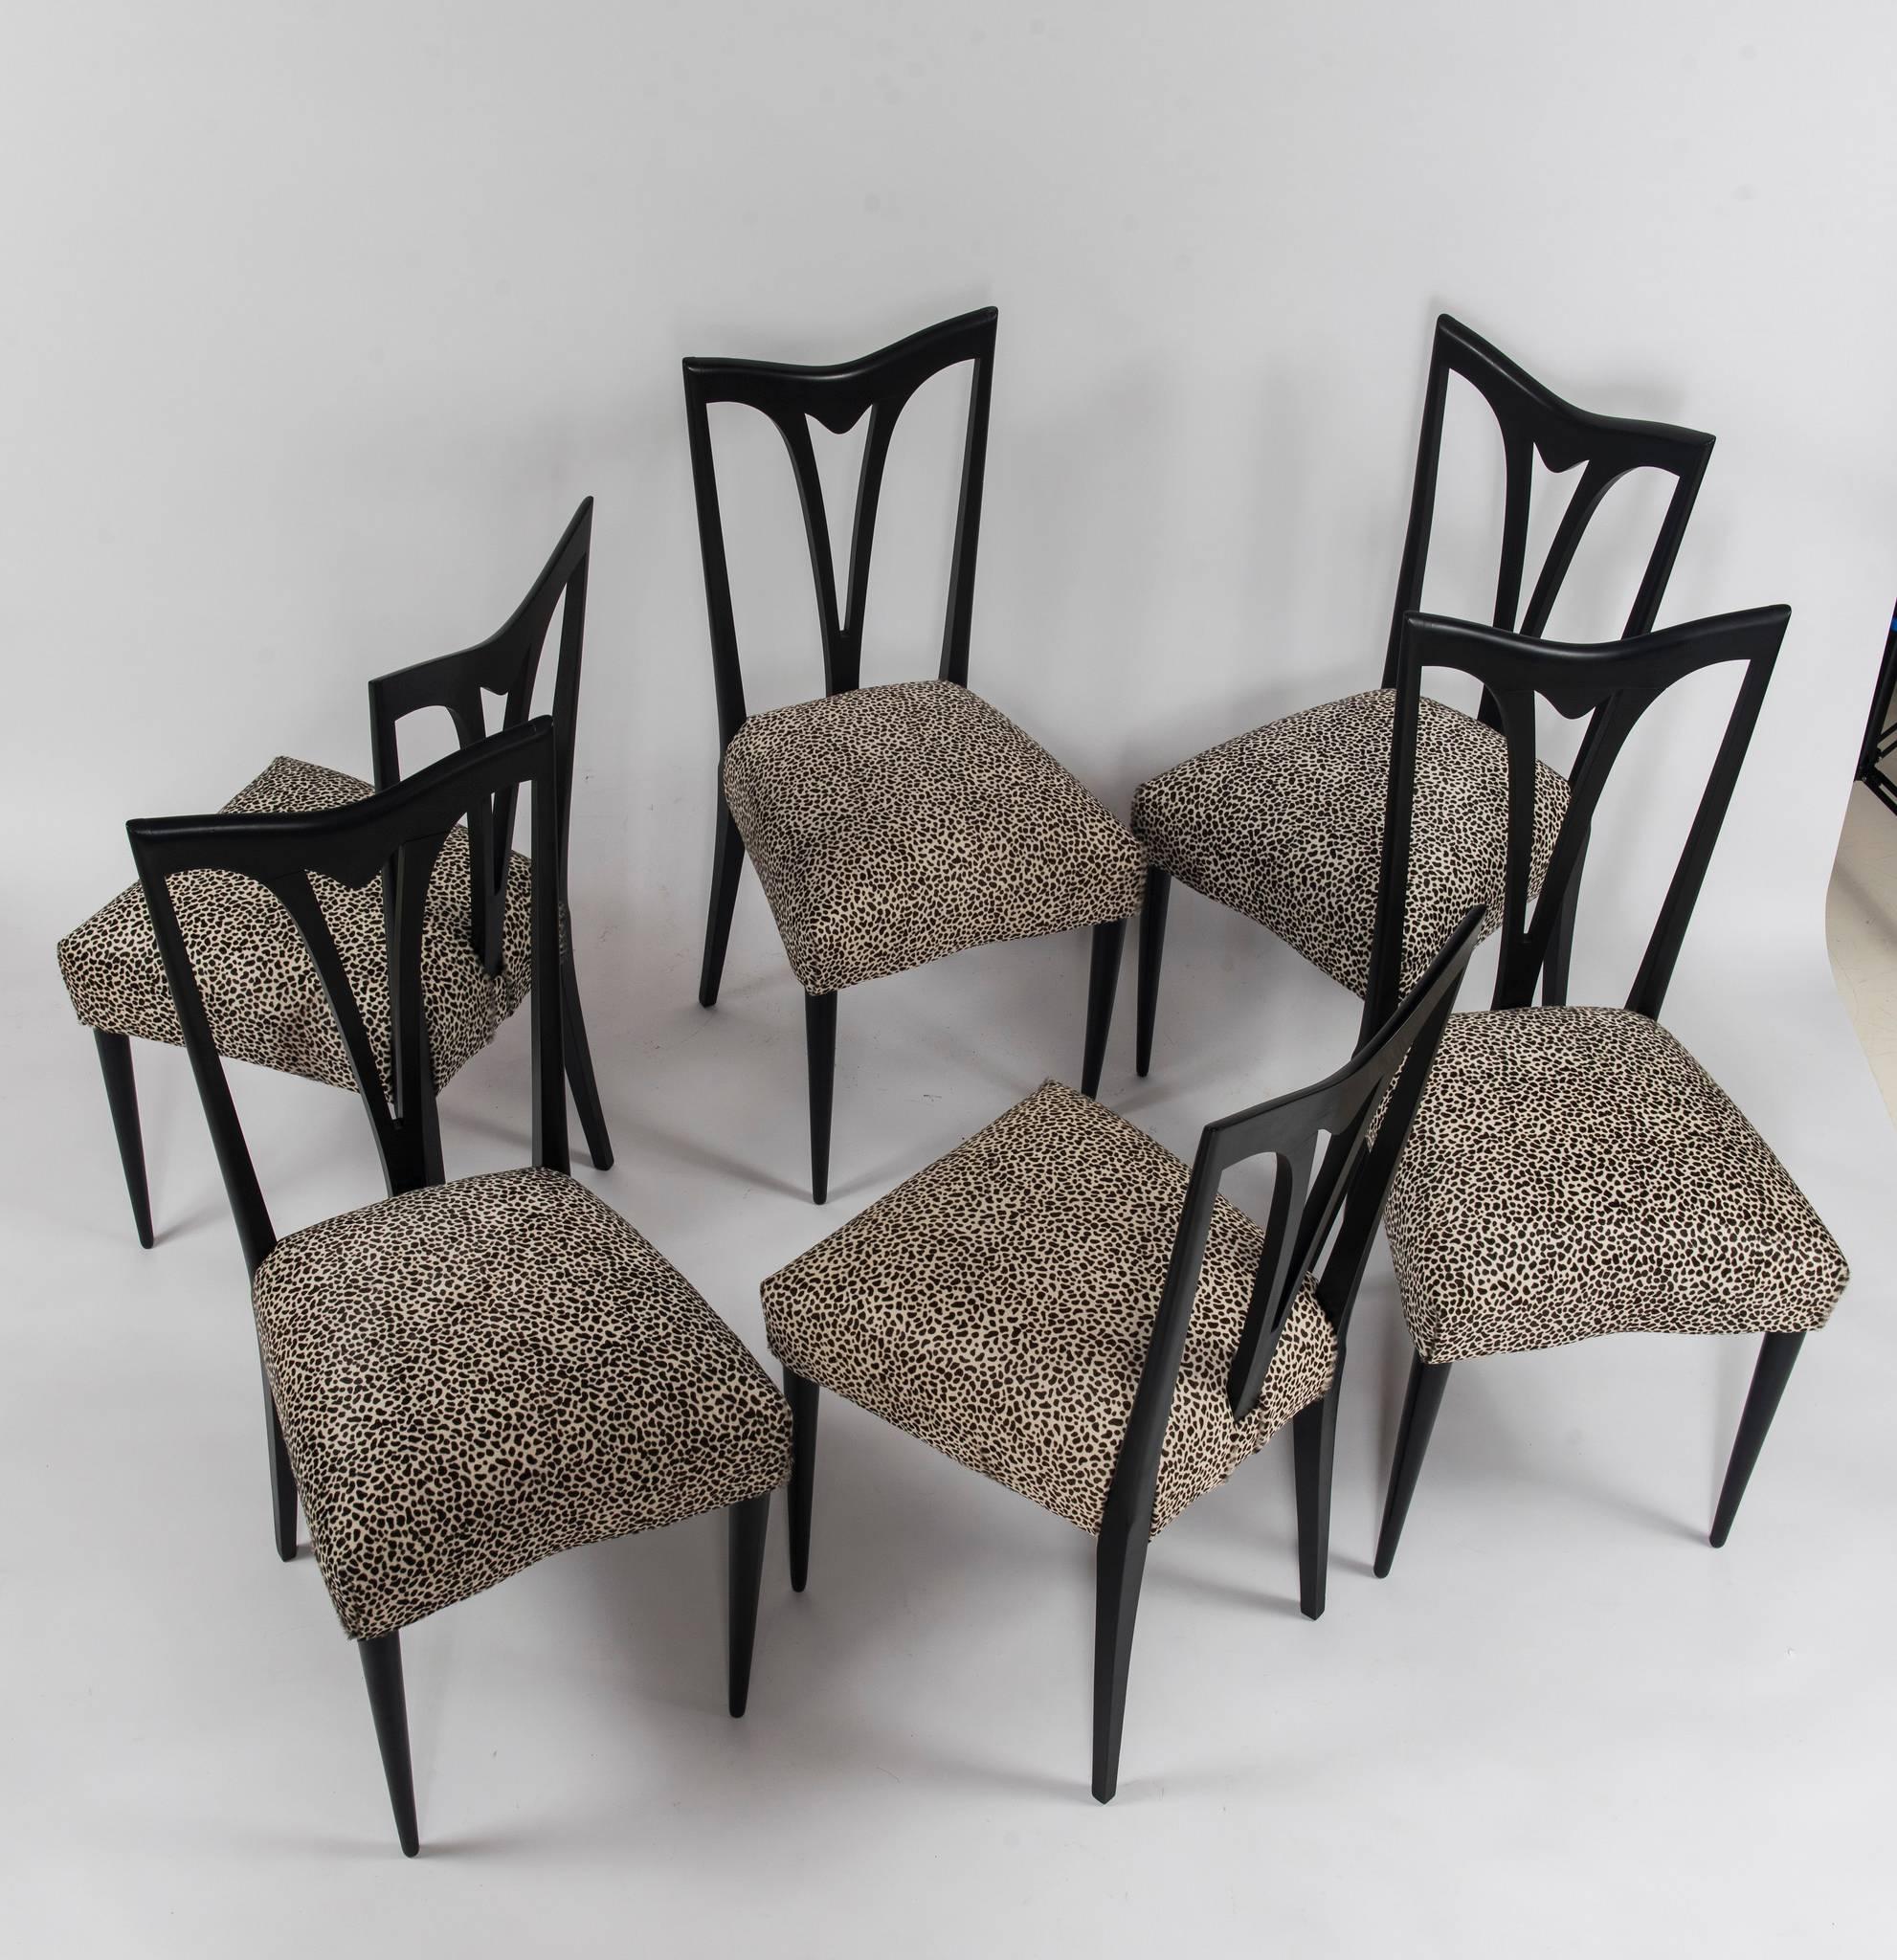 A set of six midcentury Italian dining chairs newly upholstered in a black and white leopard printed hair hide.